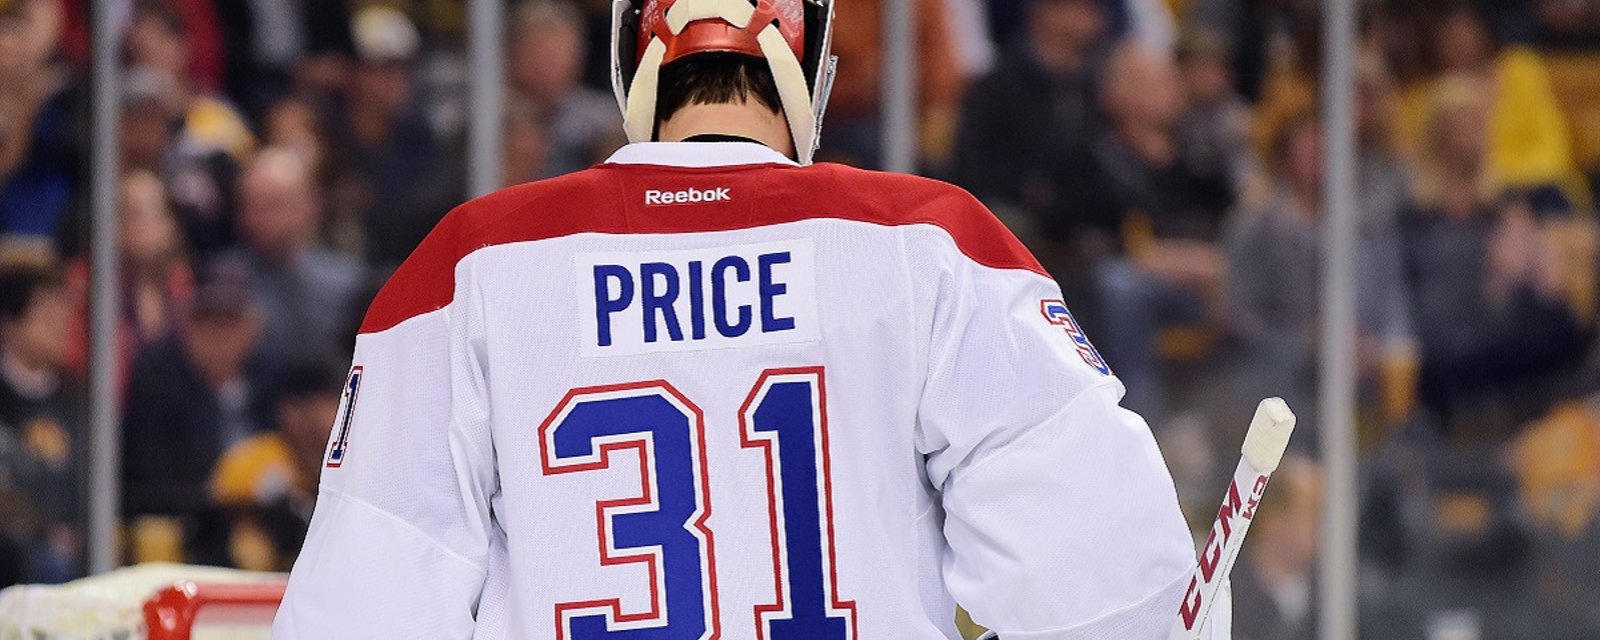 Huge rumor out of Habs practice involving Carey Price.